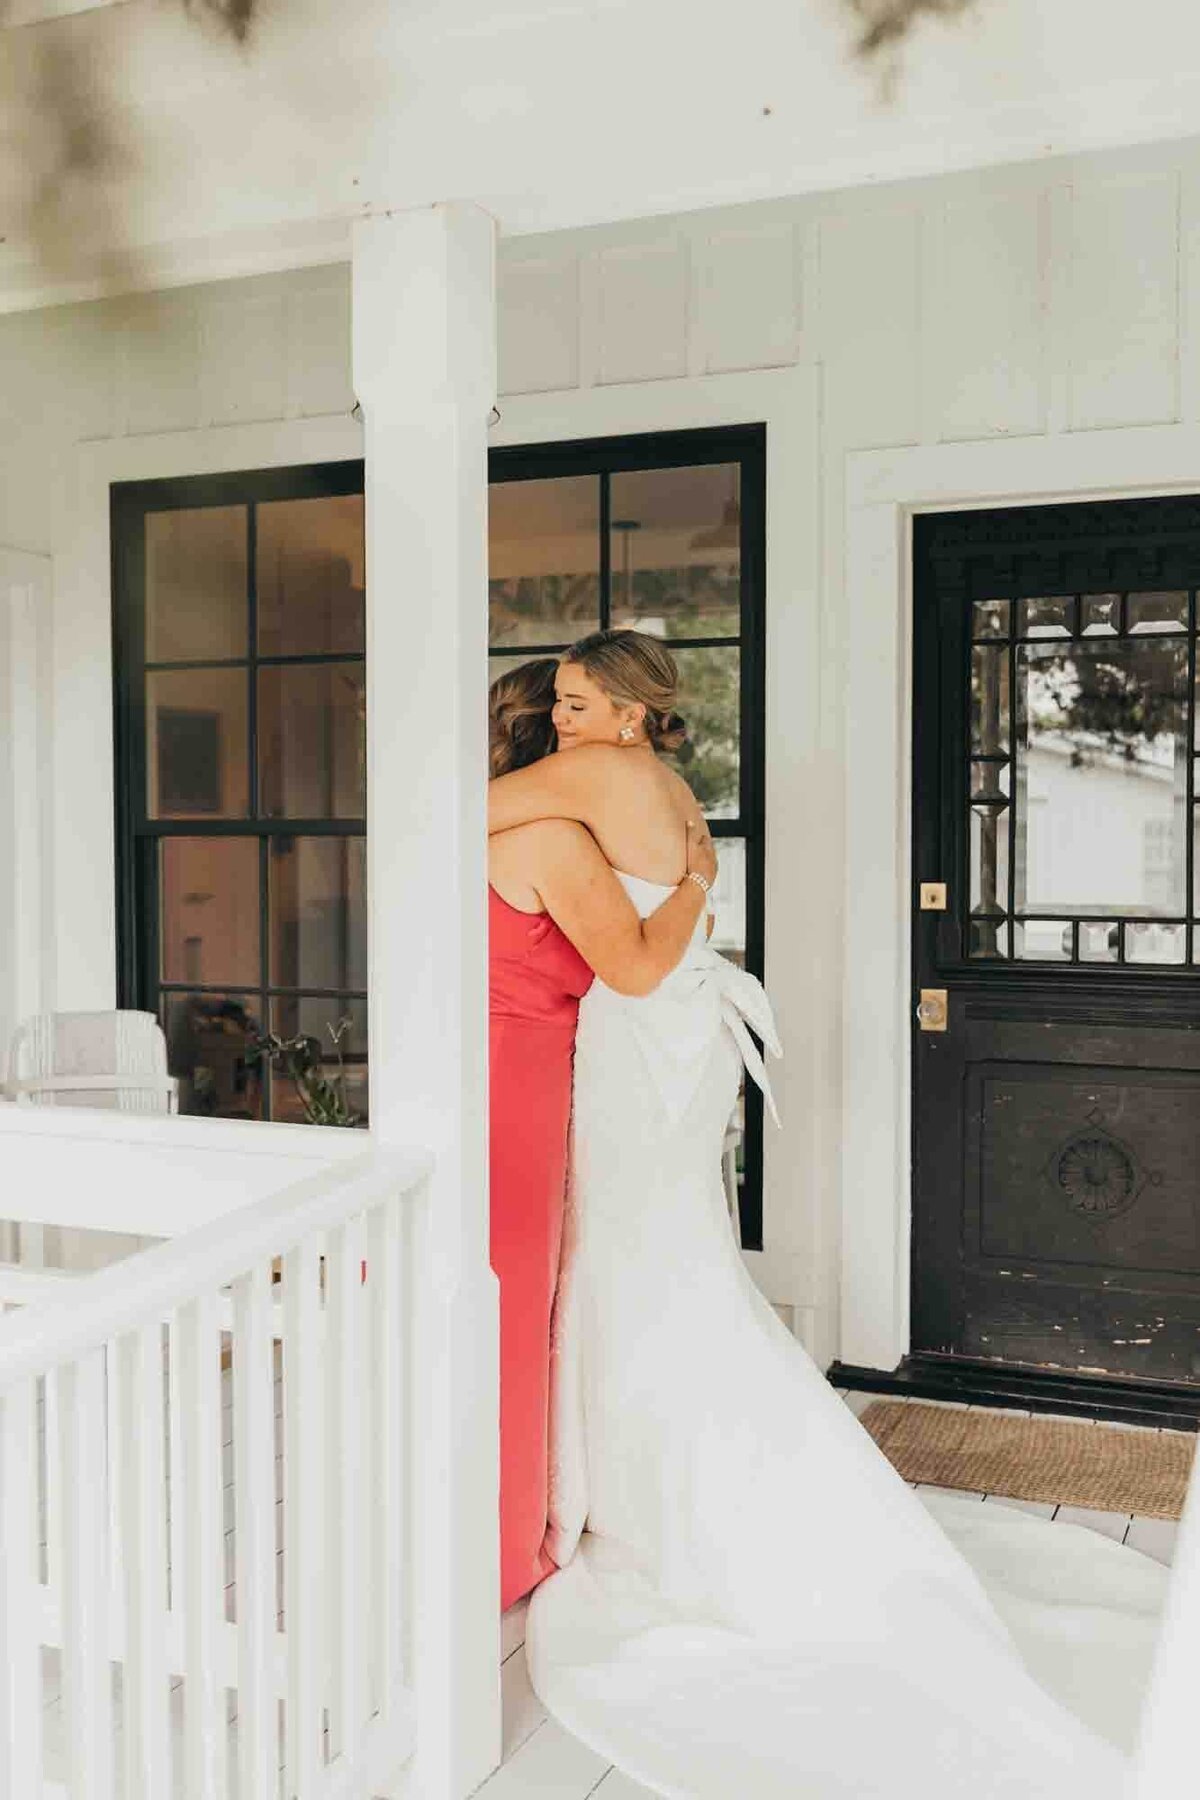 mother and daughter hug each other after mom sees her daughter in her wedding gown for the first time.